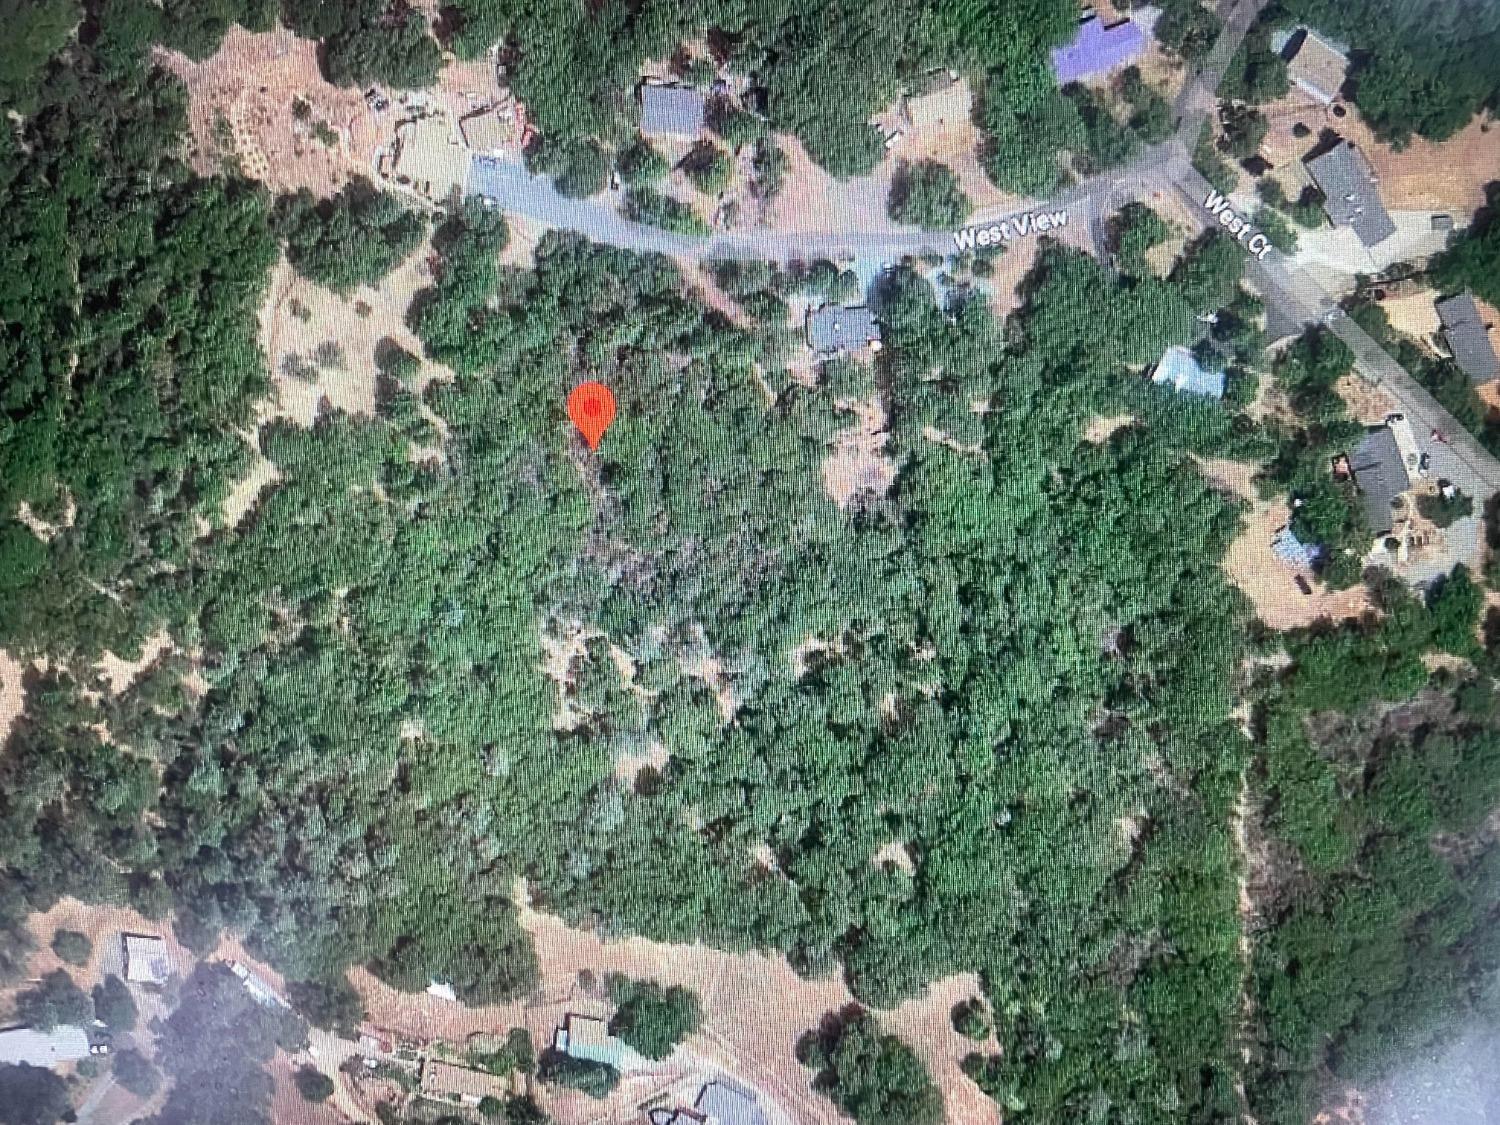 This 1.67 Acres is nestled in the Amador County Foothills. The perfect private location to build your home or getaway! Once you clear out some trees, the views of the Mountains and rolling hills will unfold before your eyes.